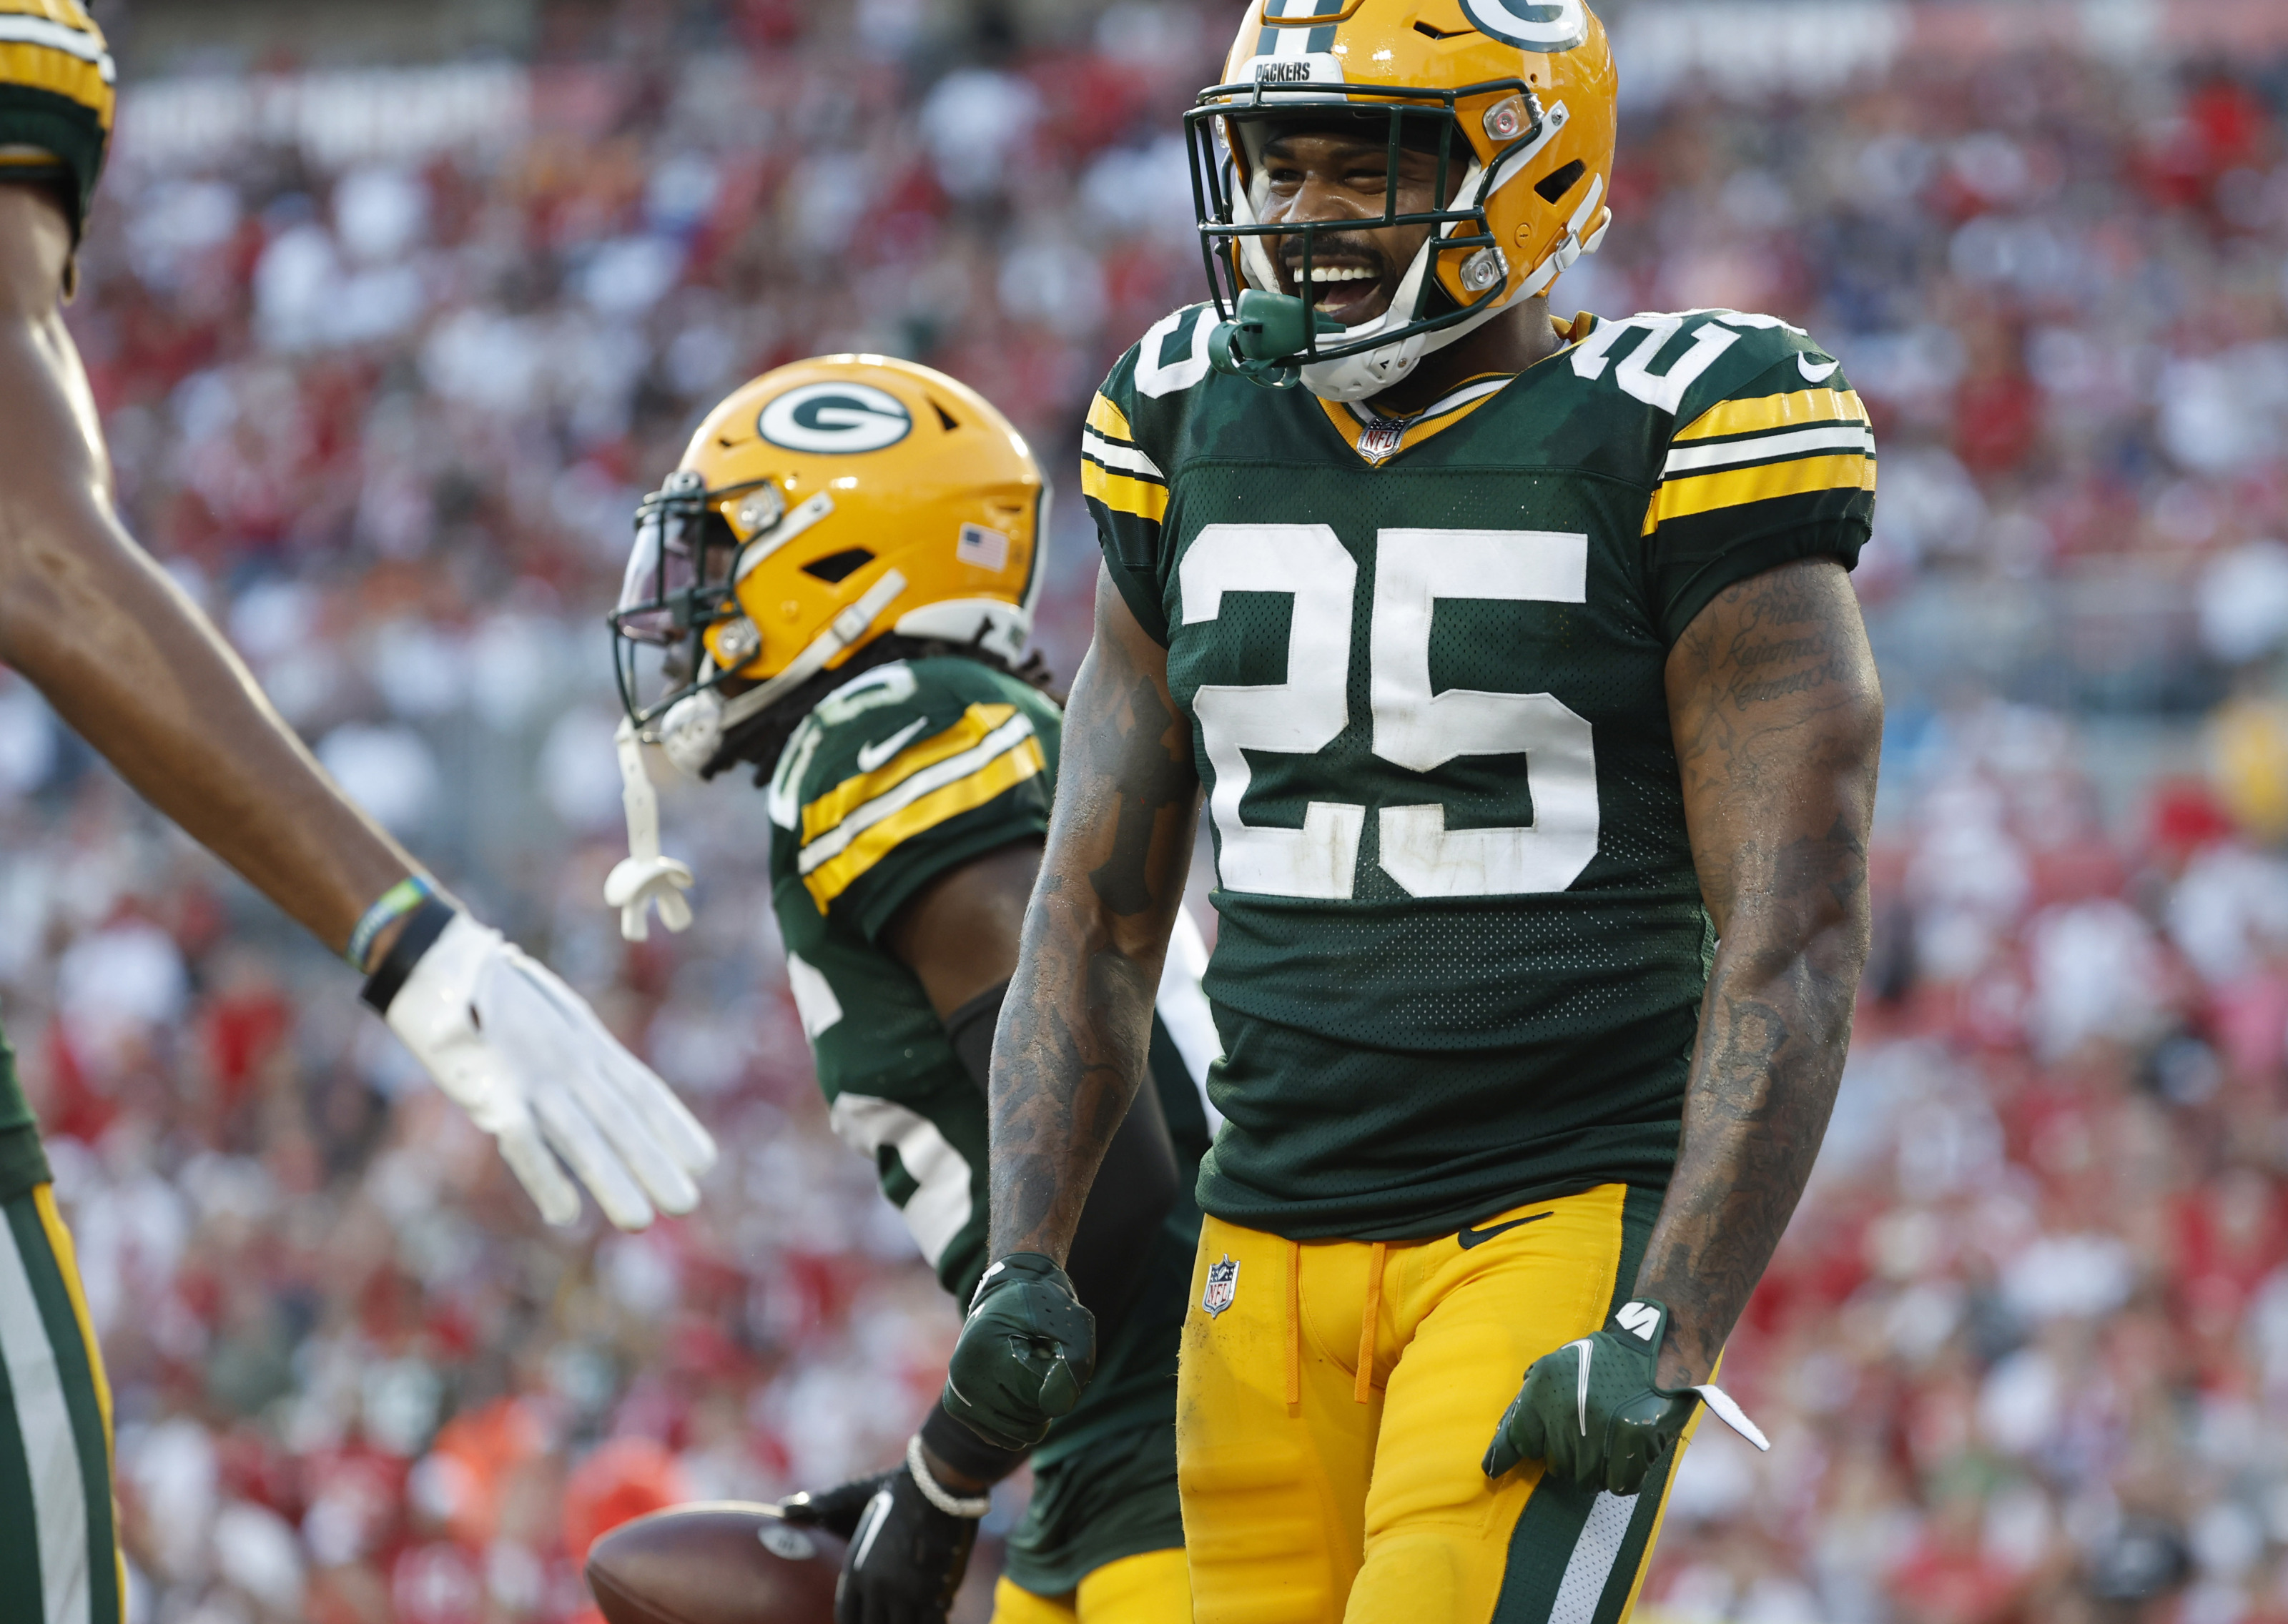 Keisean Nixon providing stability in slot for Packers when called upon